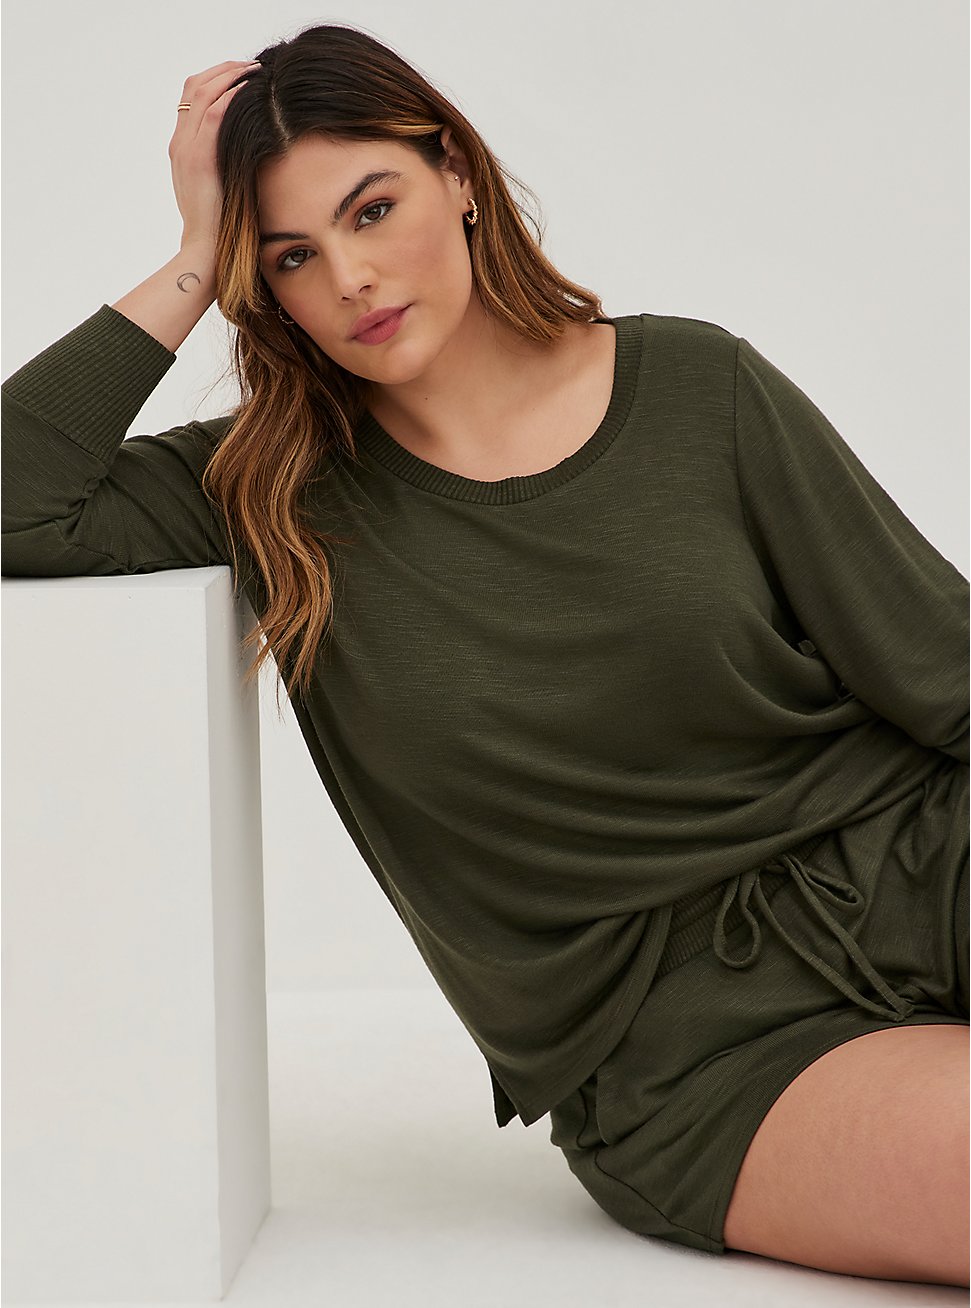 Light Weight Hacci Long Sleeve Lounge Tee, OLIVE, hi-res